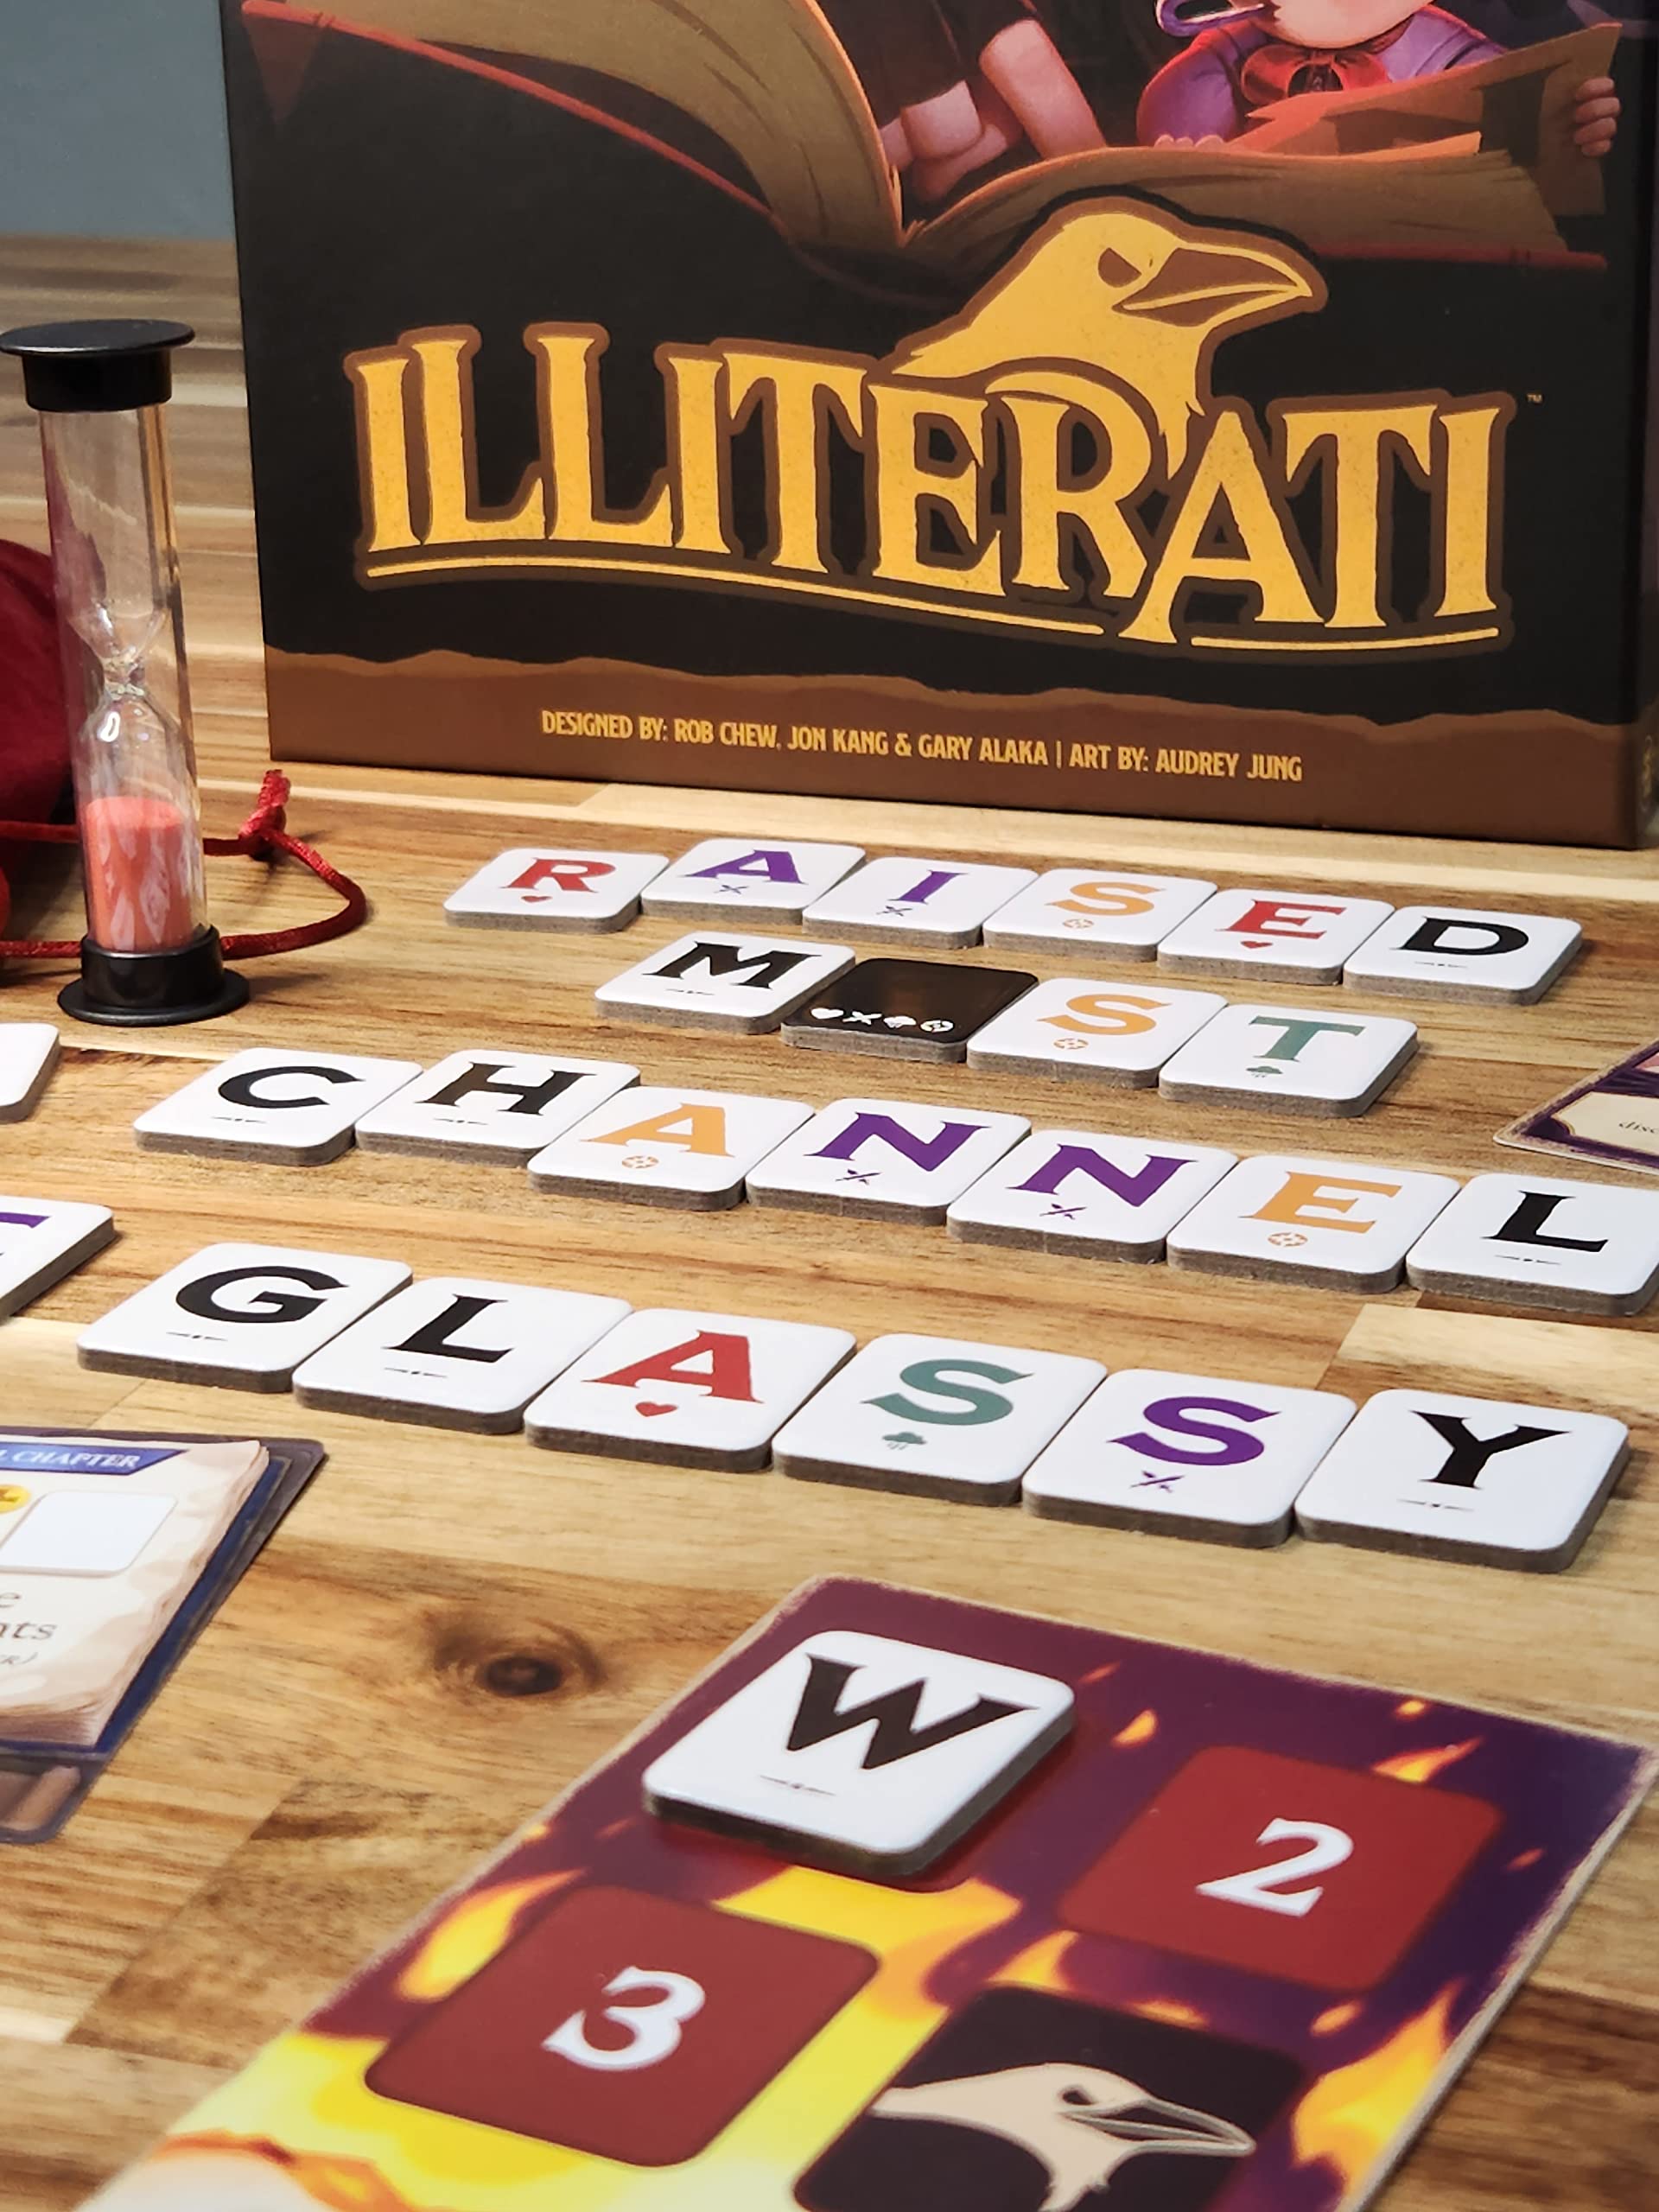 Gap Closer Games Illiterati - Cooperative Survival Word Game, Family, Ages 7+, 1-5 Players, 40 Min